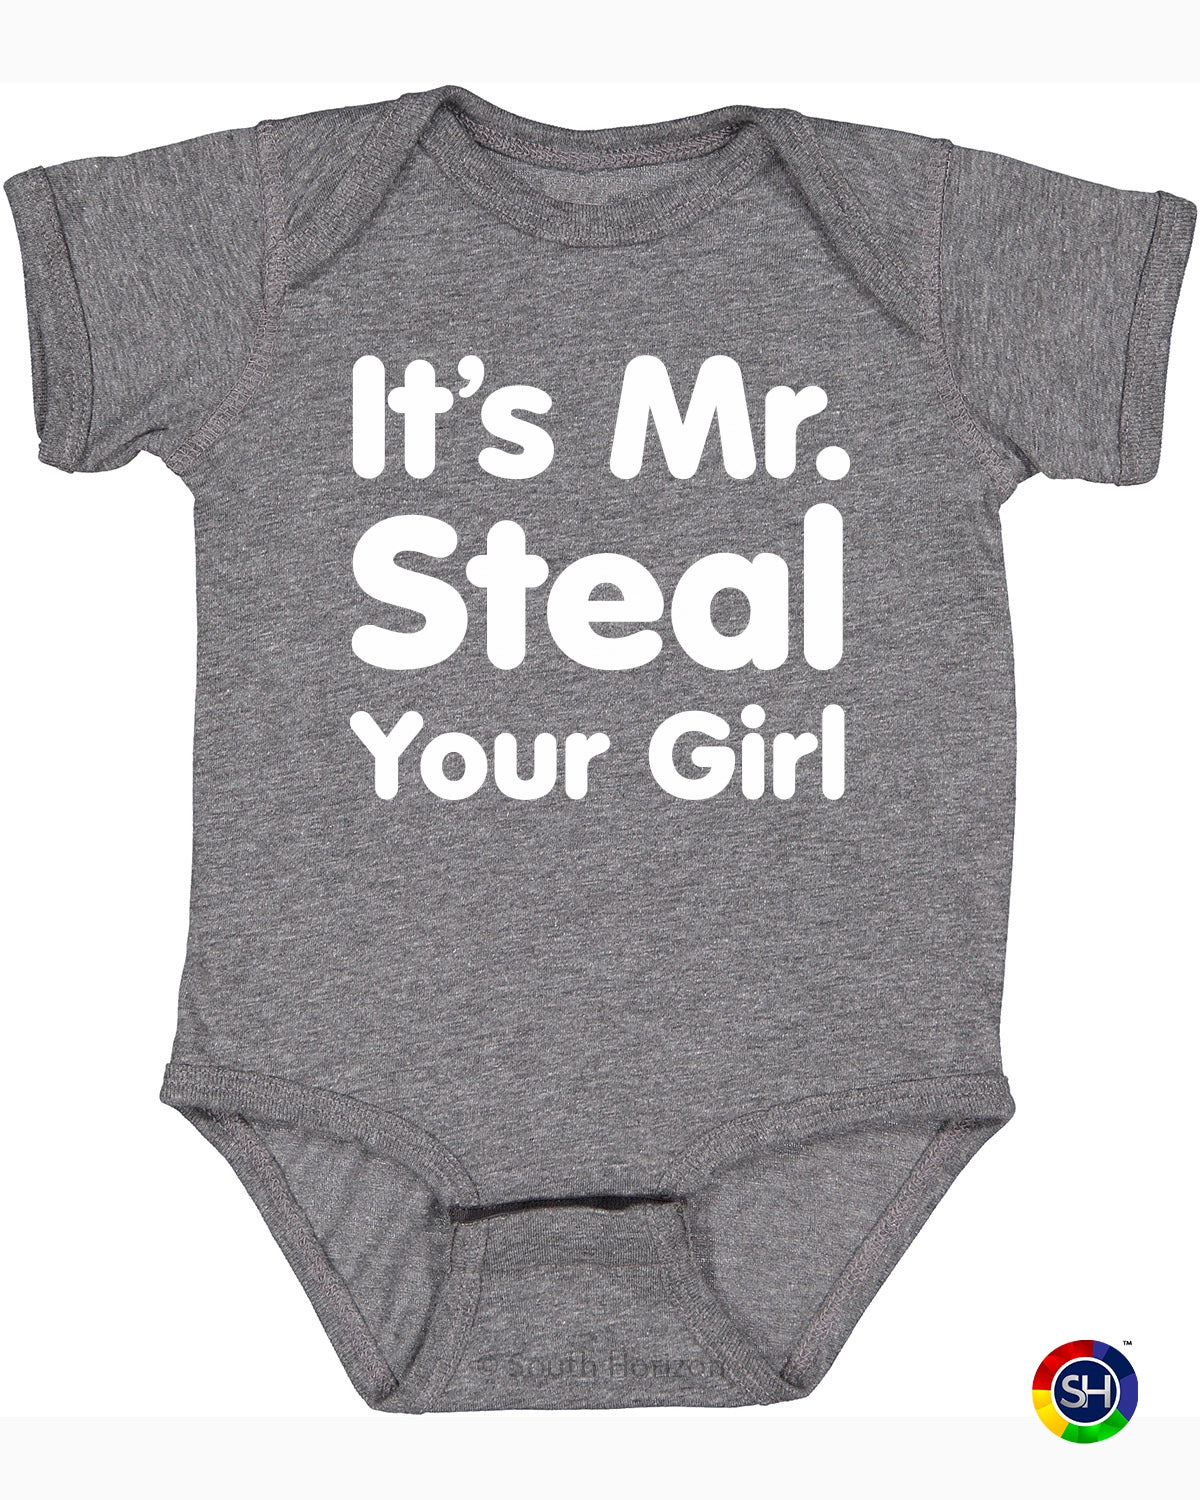 It's Mr. Steal Your Girl on Infant BodySuit (#905-10)